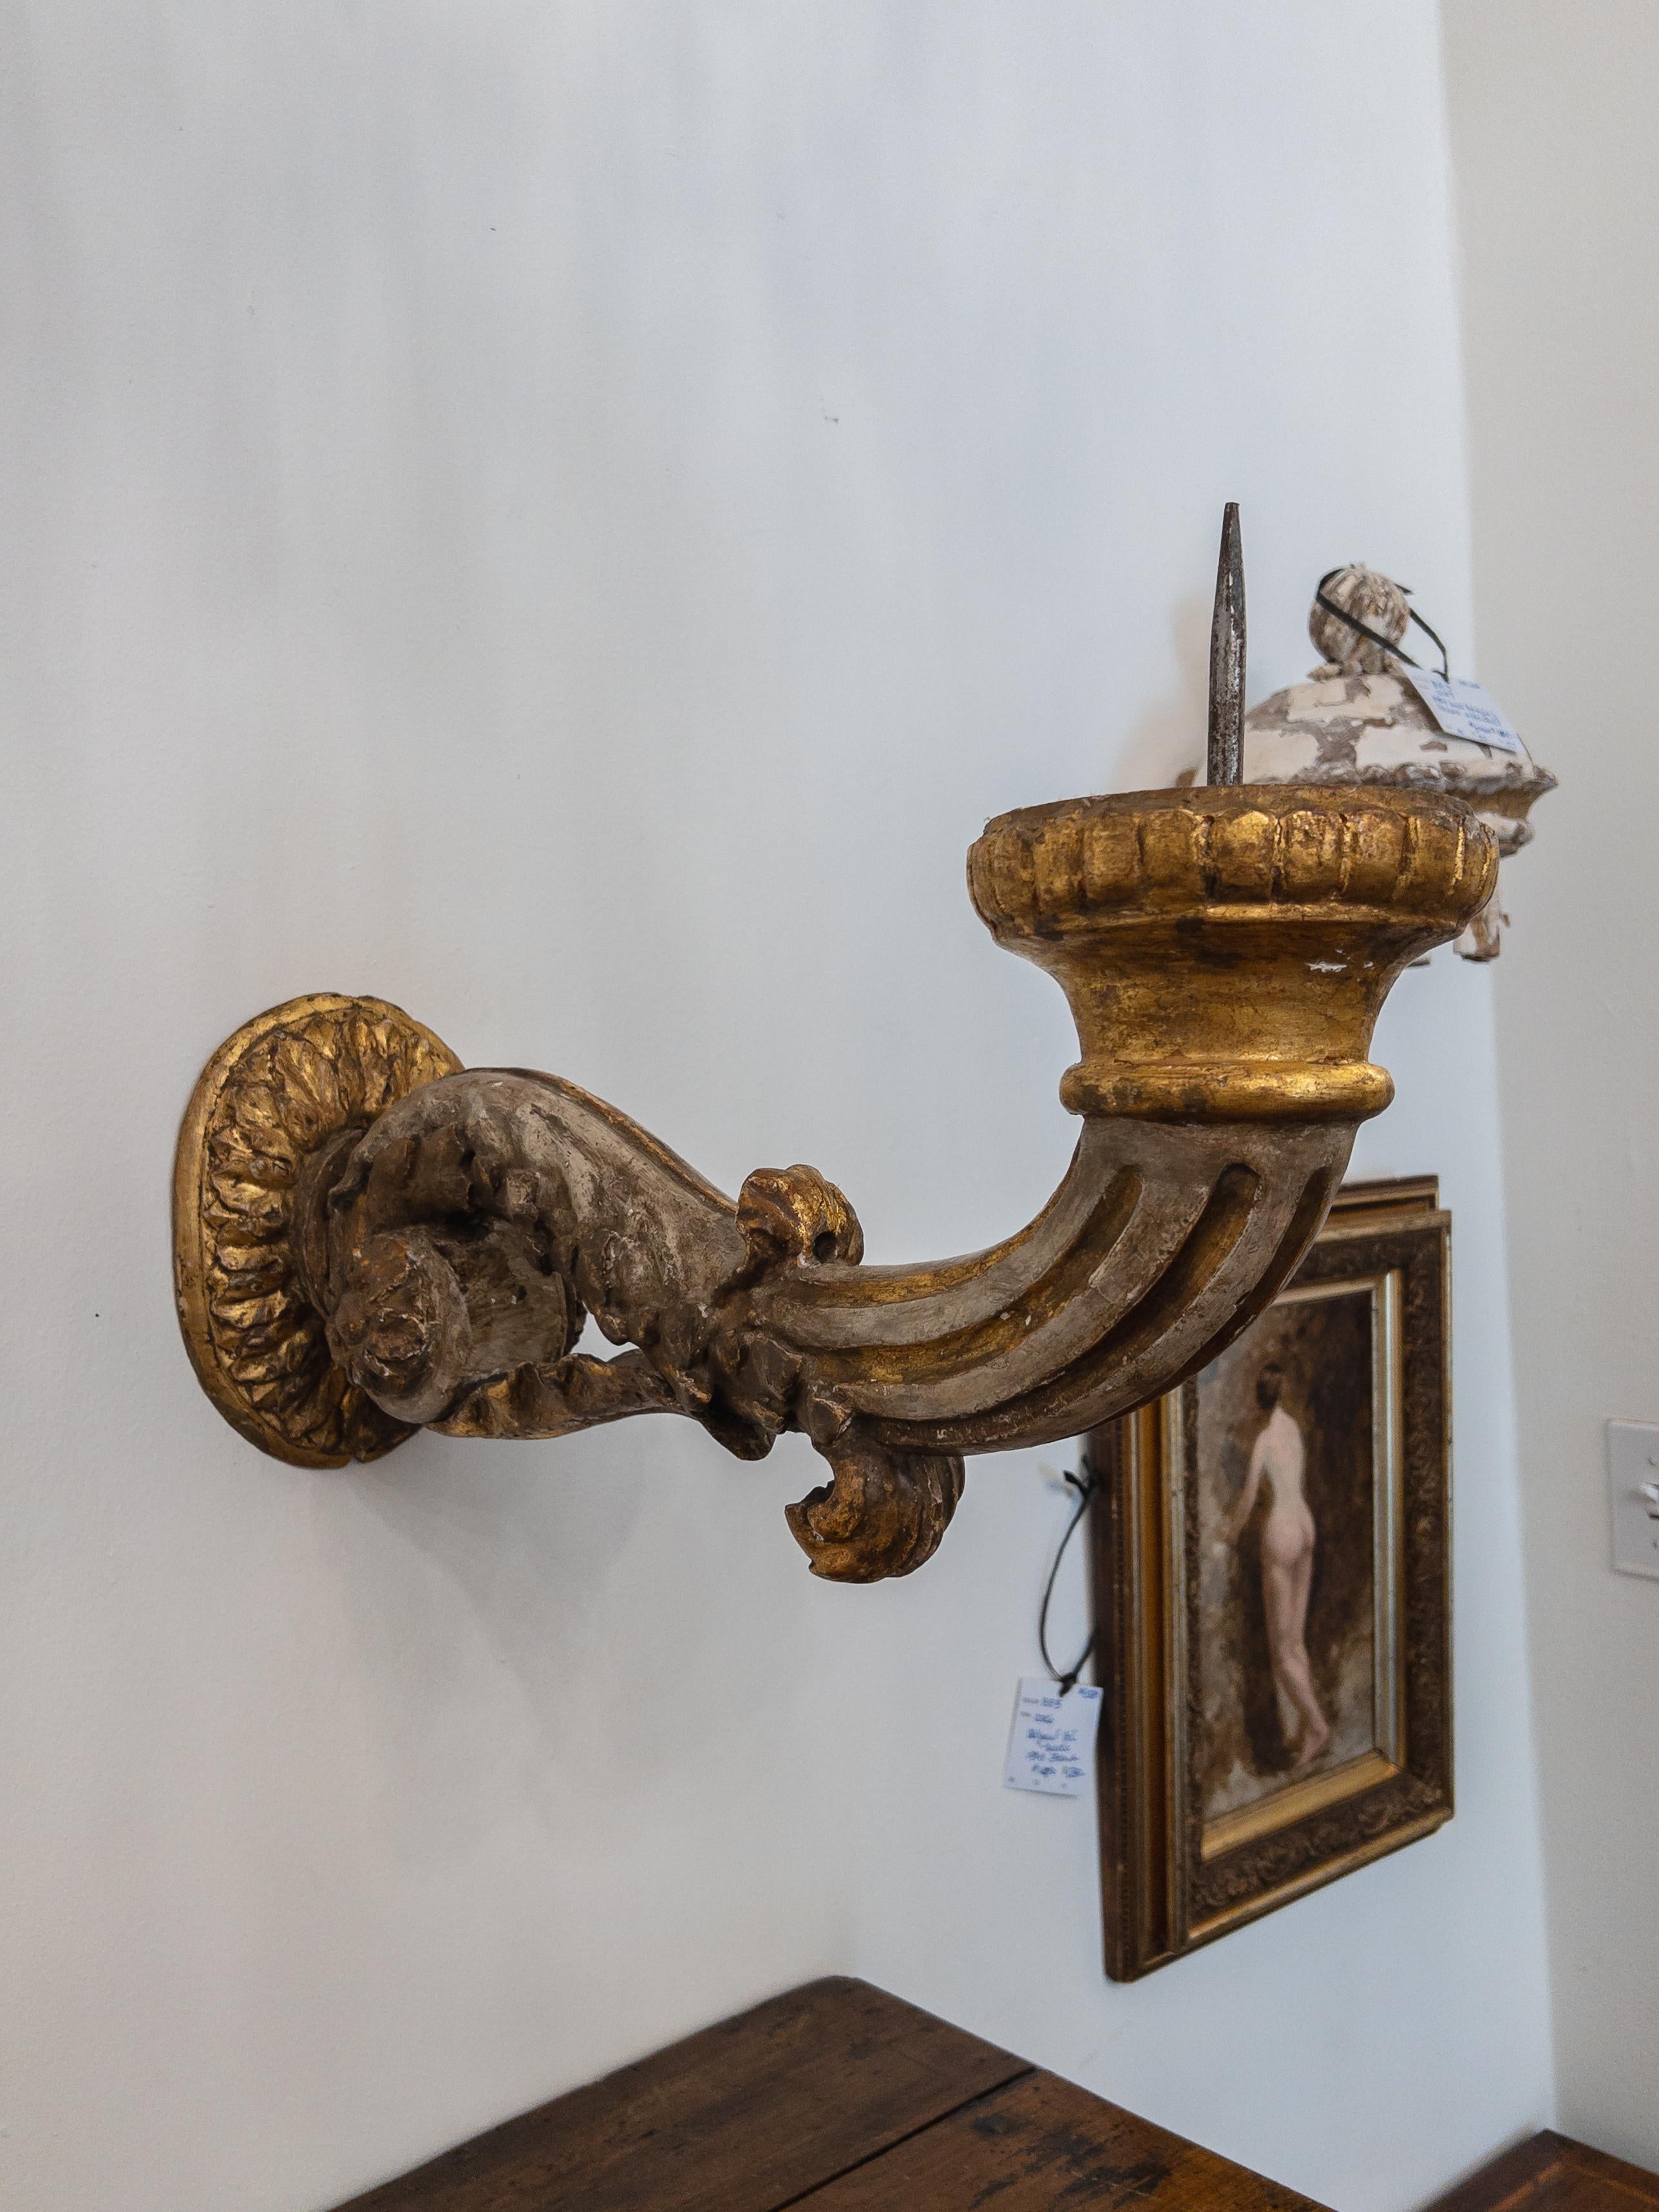 A pair of 19th-century Italian wood-carved pricket sconces are exquisite and antique wall-mounted candleholders. These sconces are crafted from wood, and their design showcases intricate carvings, displaying the artistic talent of Italian